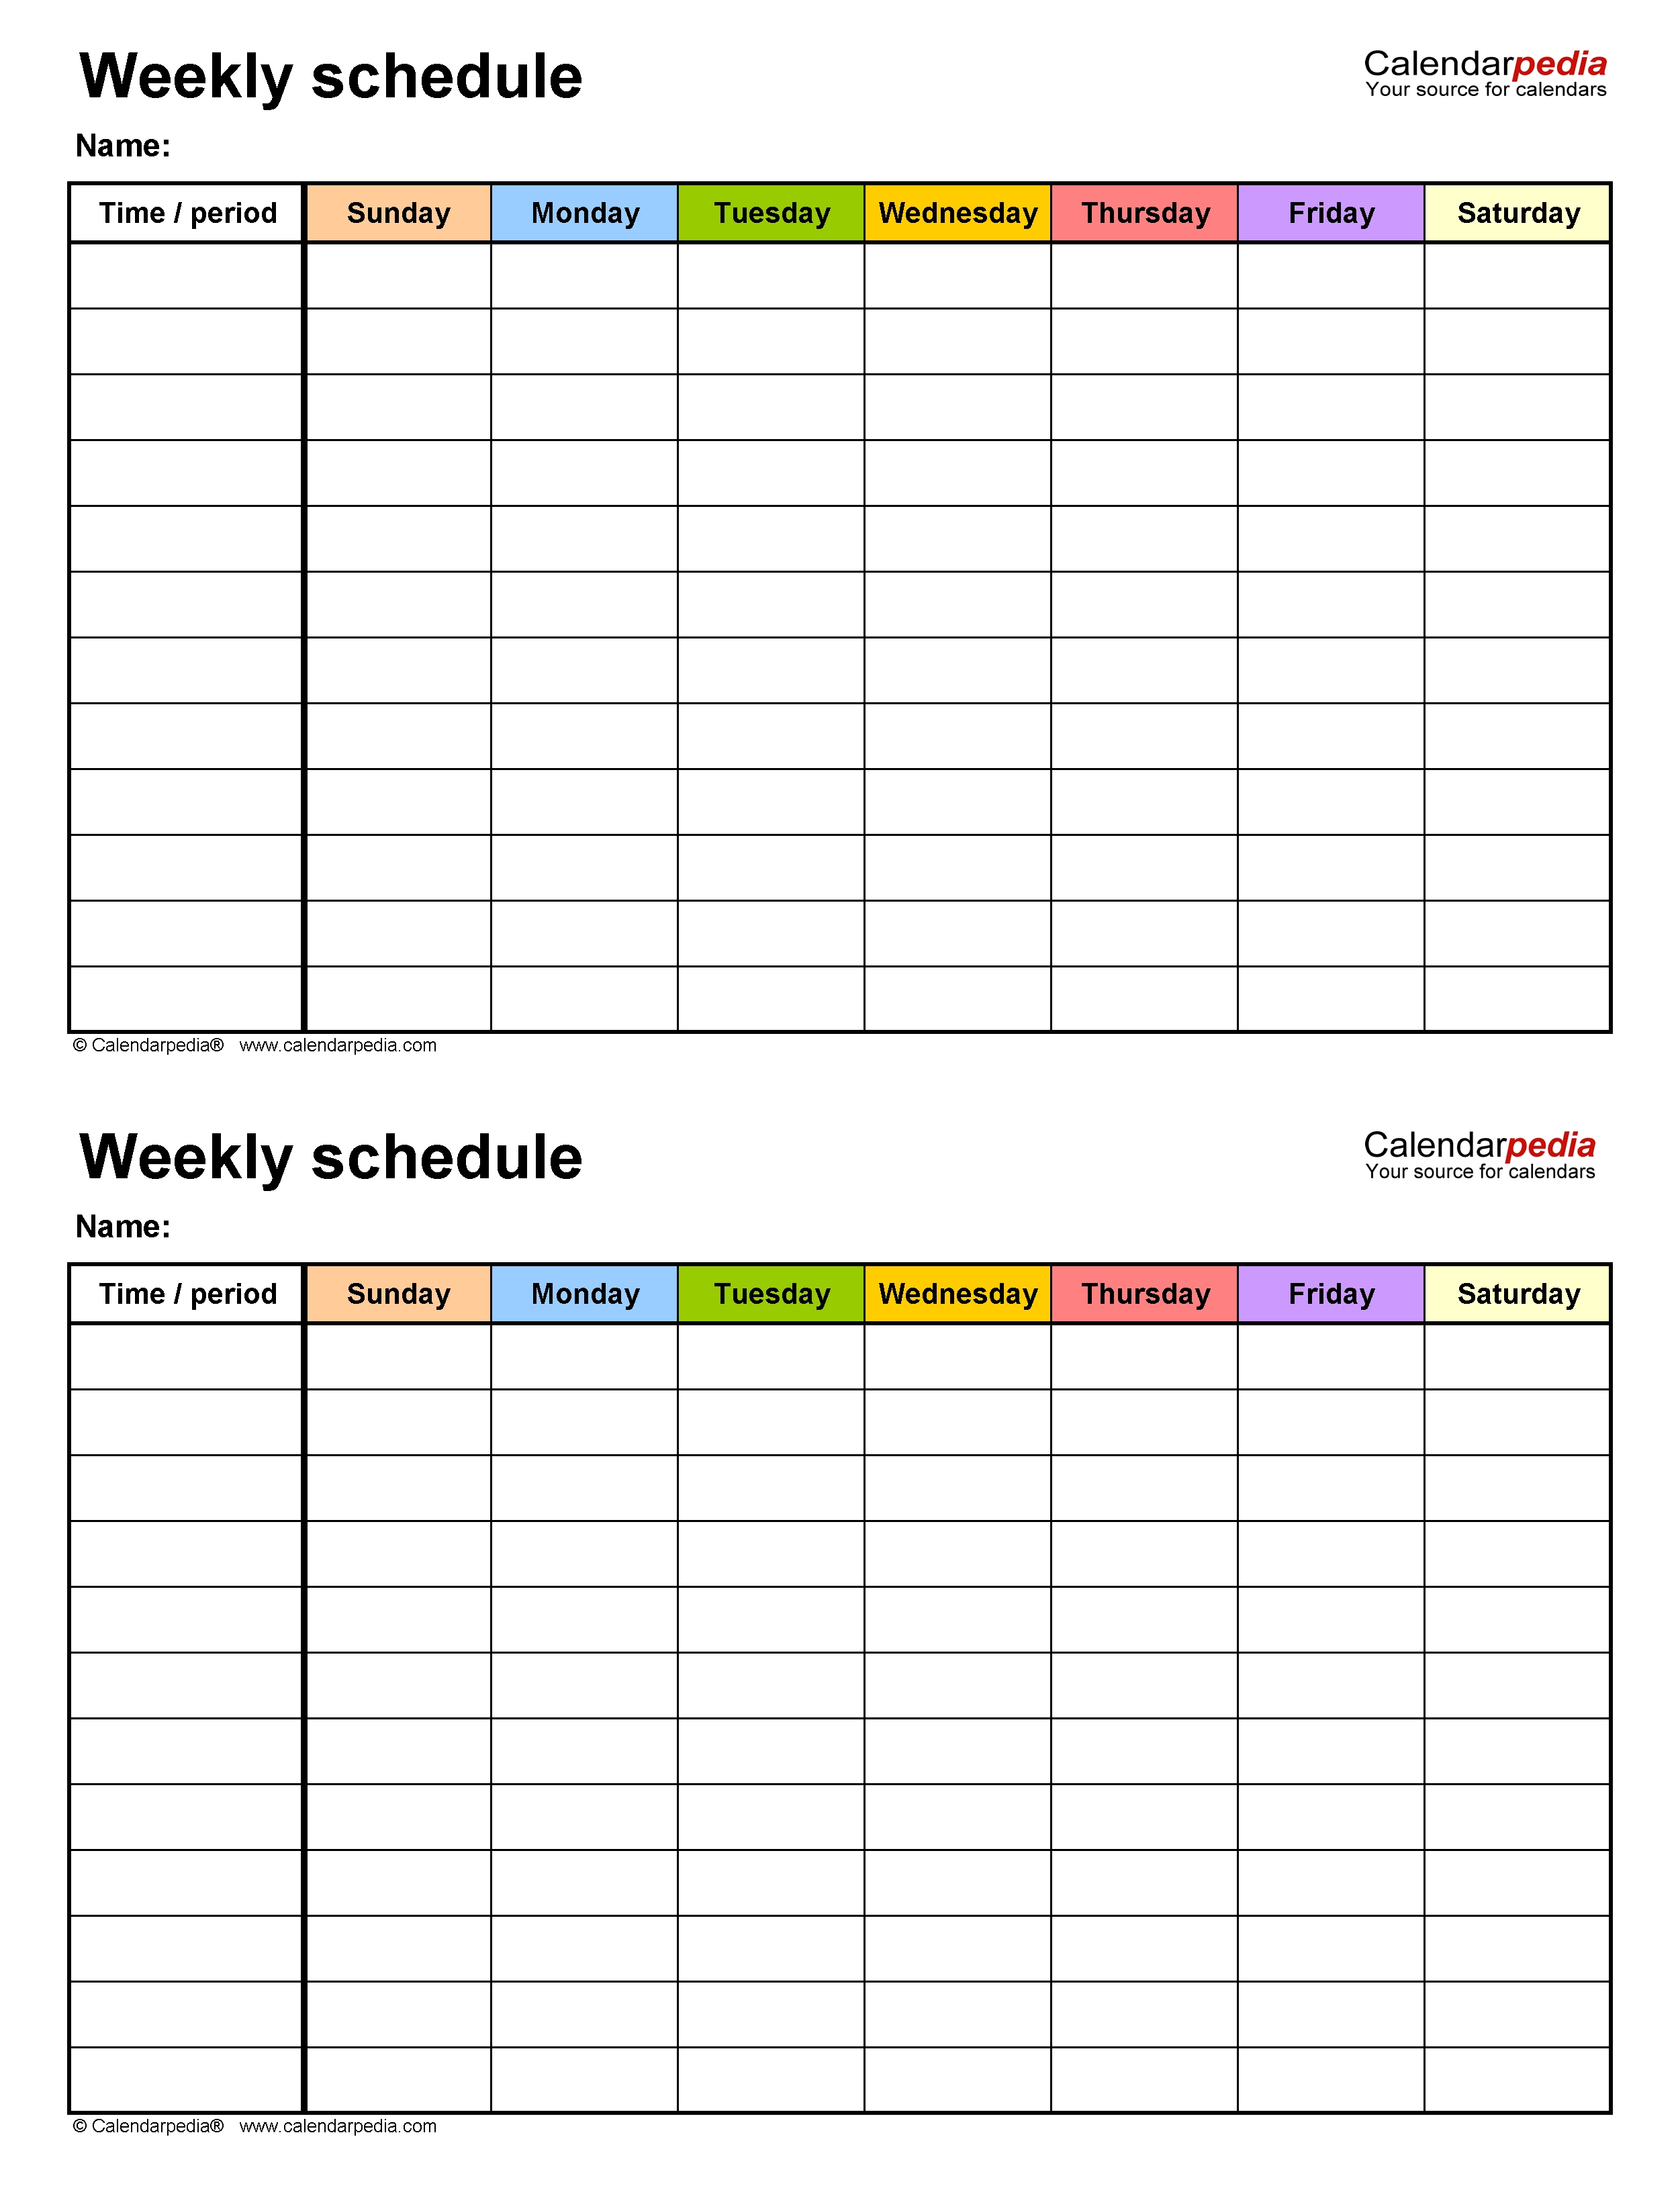 Free Weekly Schedules For Excel - 18 Templates 7 Day Calendar Template Excel